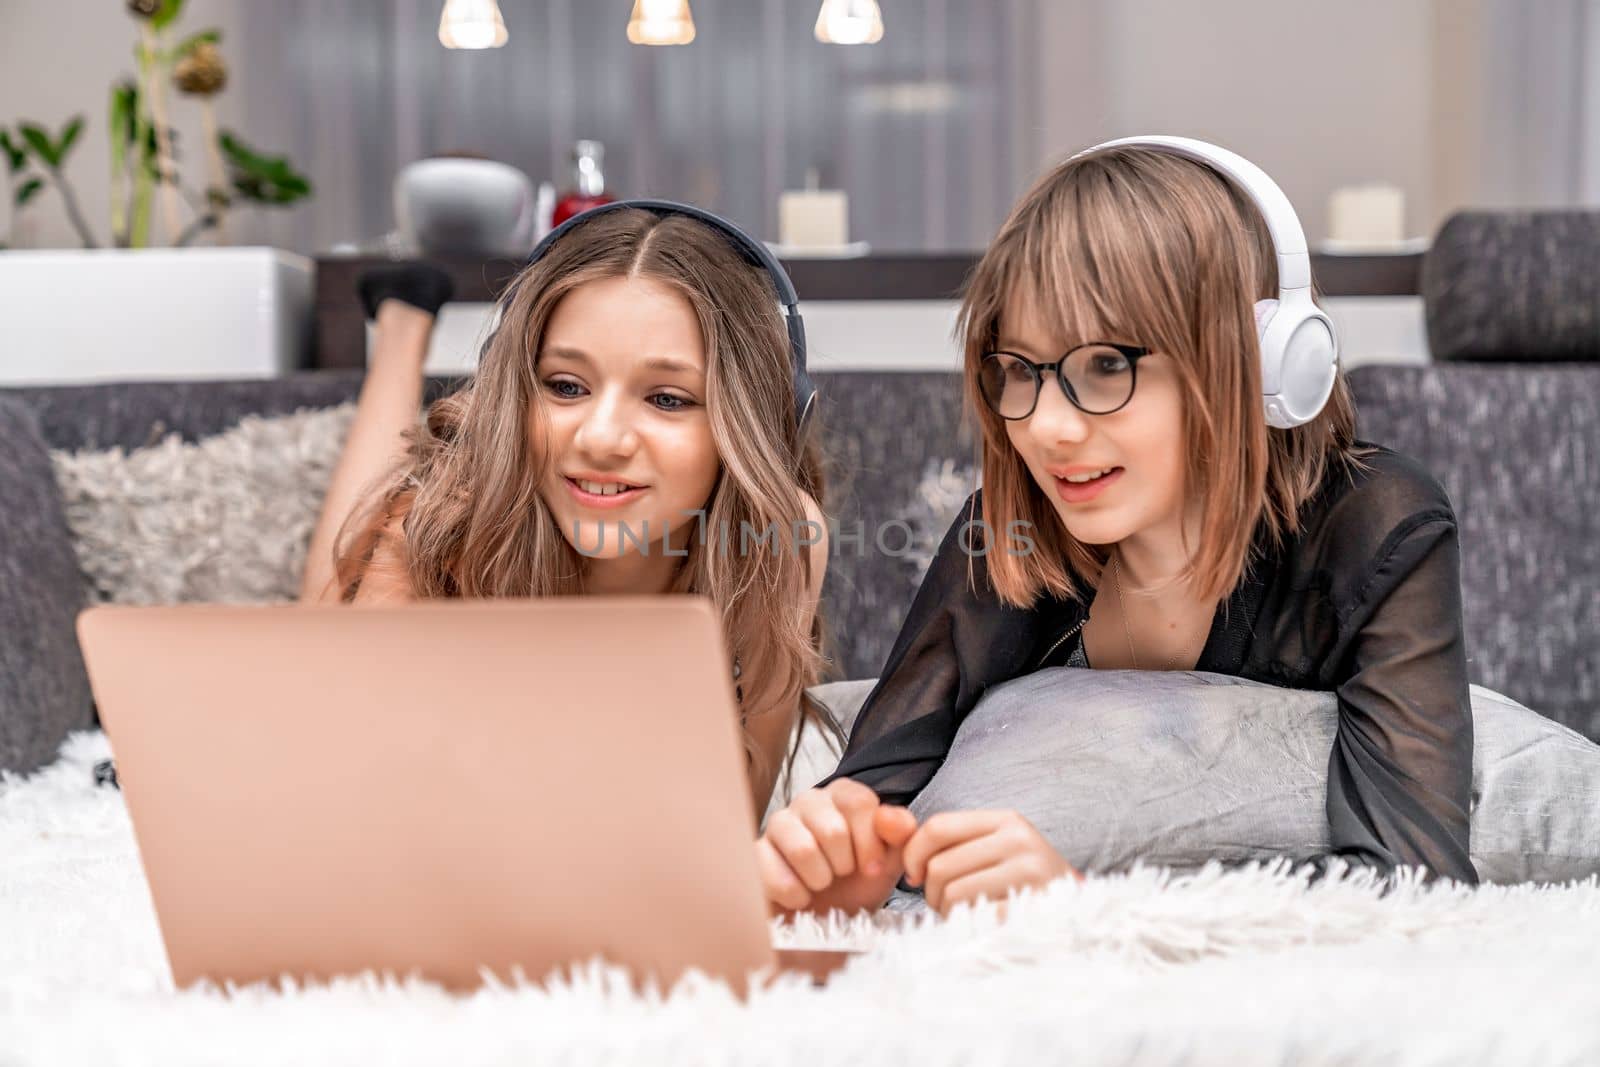 children with wireless headphones on their heads enjoy internet entertainment online on a laptop at home. High quality photo